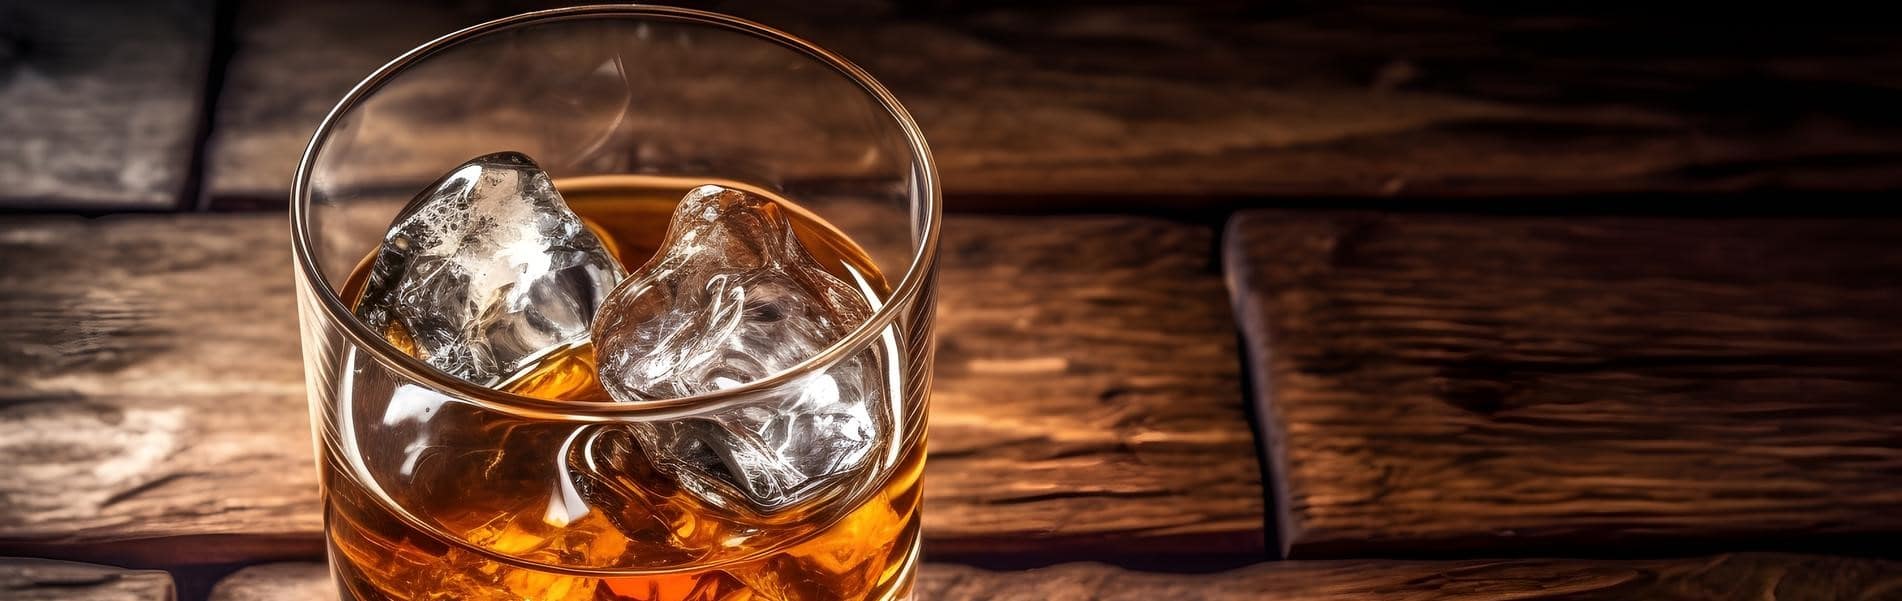 glass-whiskey-with-ice-cubes-wooden-table.jpg